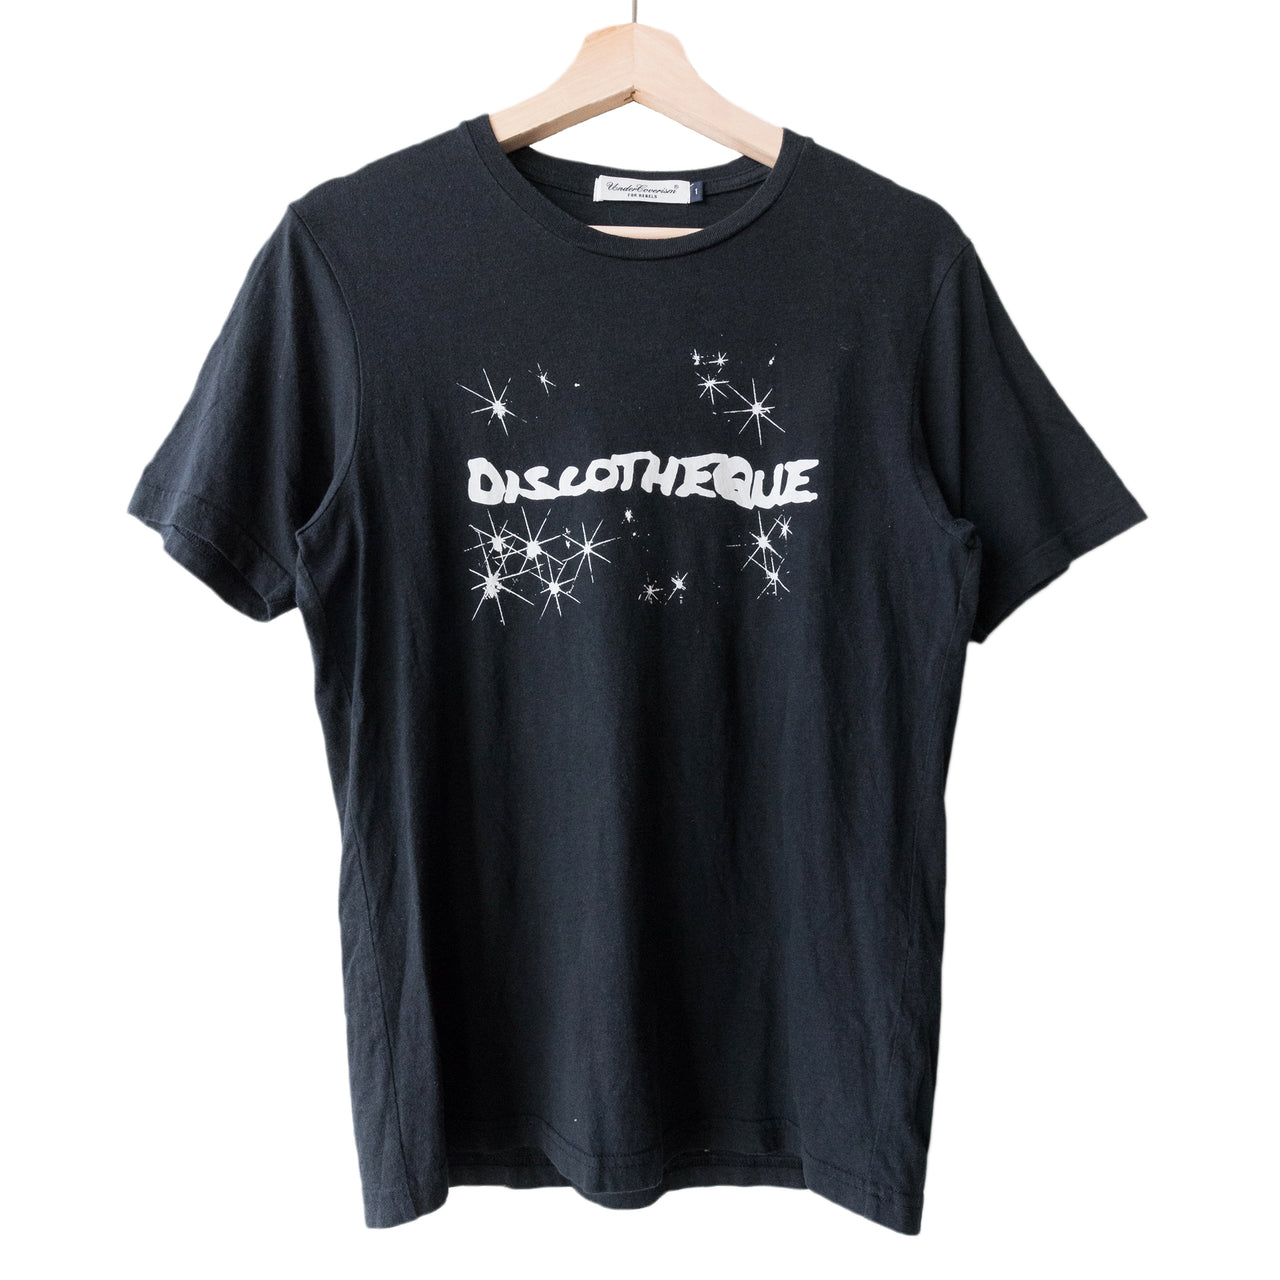 Undercover "Discotheque" Tee - SS08 "Summer Madness"